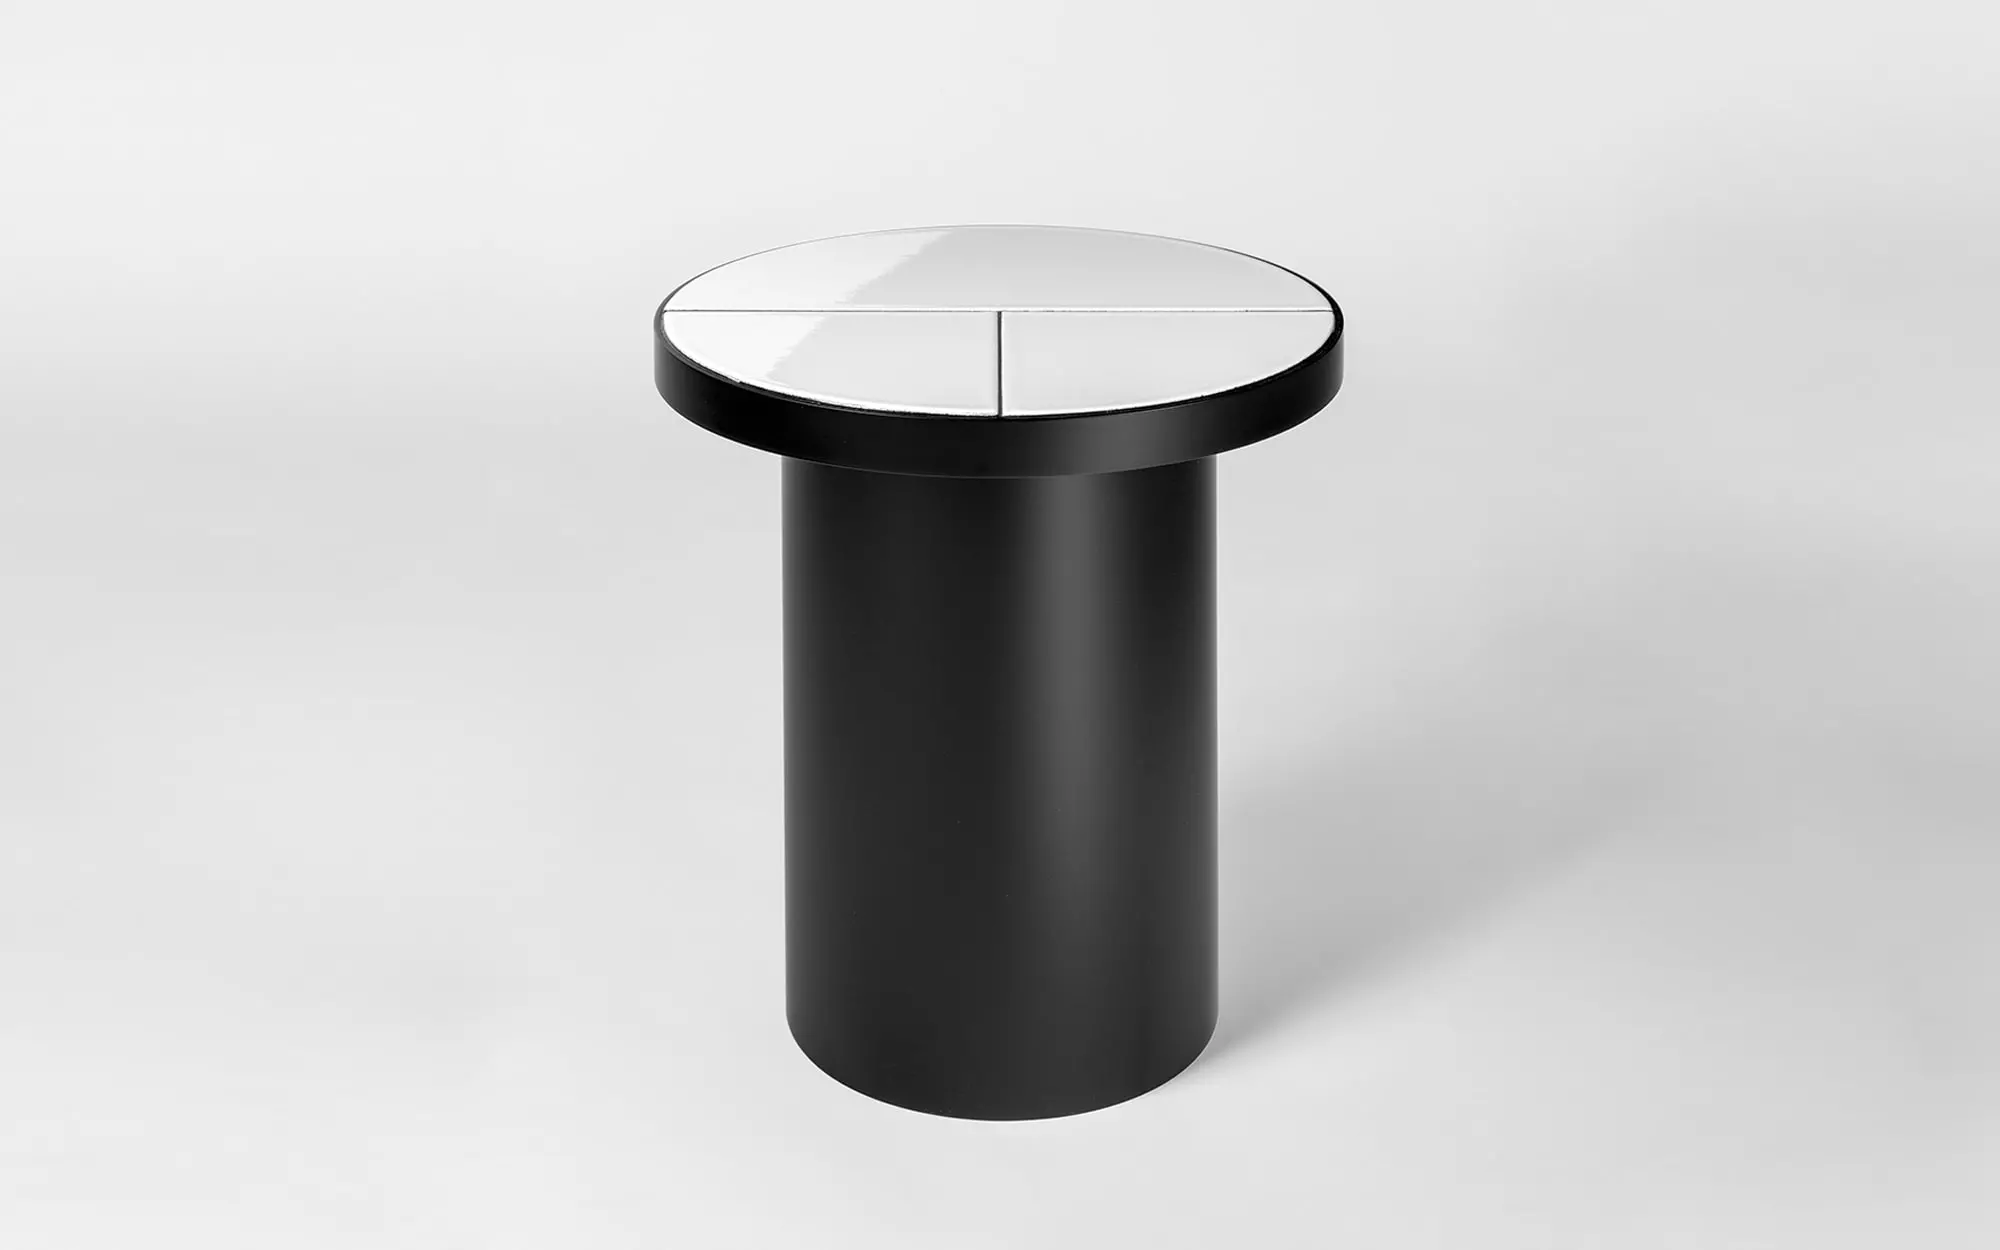 Fraction - monochromatic Side Table - Pierre Charpin - Resemblance(s).